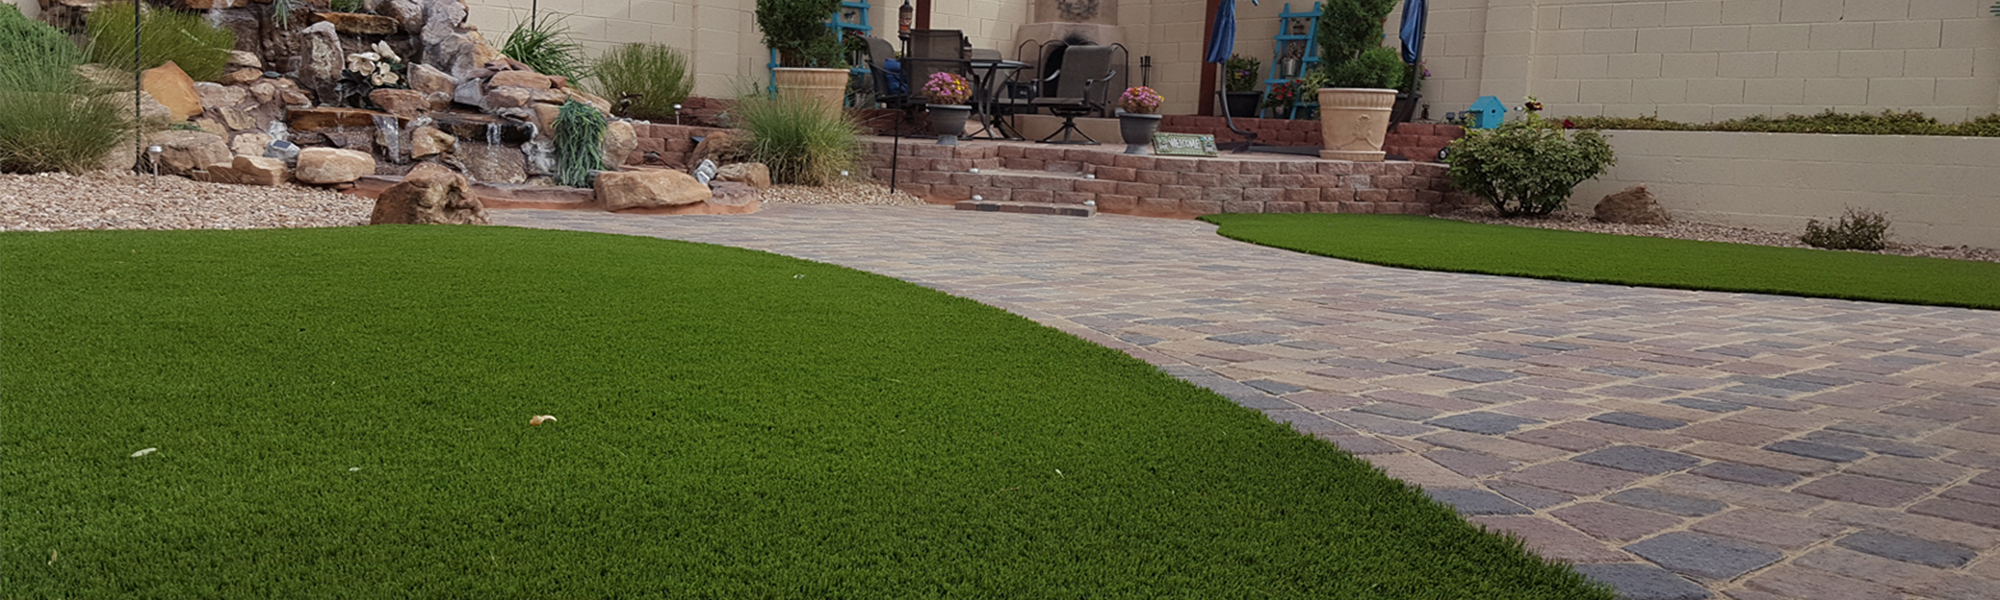 New Mexico Artificial Grass Putting, Landscaping Carlsbad New Mexico